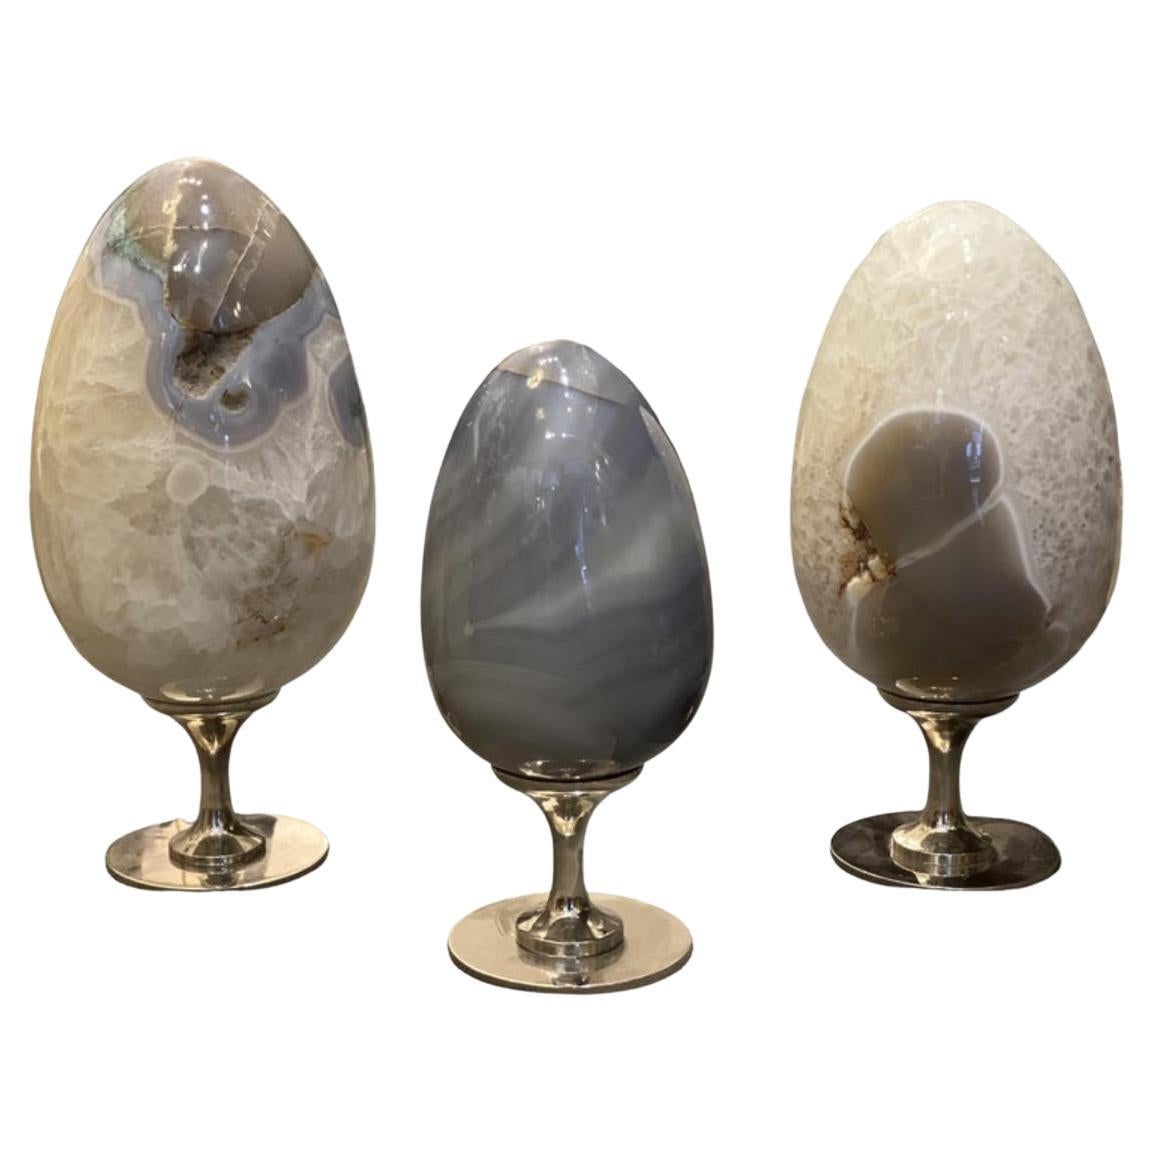 Group of Three Natural Agate Sculptures